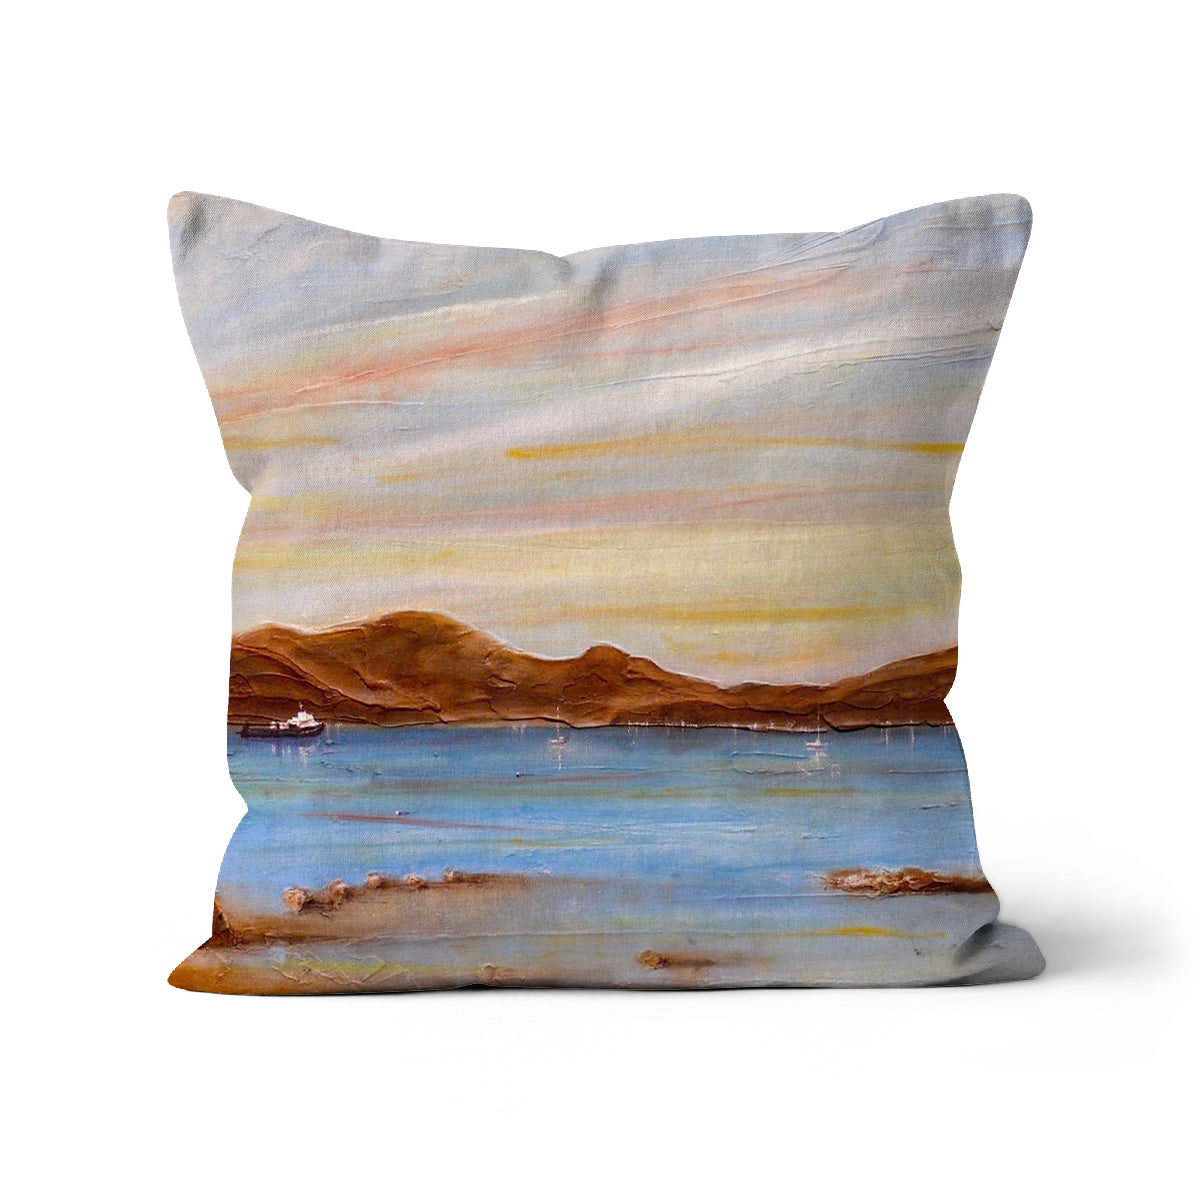 The Last Ferry To Dunoon Art Gifts Cushion-Cushions-River Clyde Art Gallery-Canvas-22"x22"-Paintings, Prints, Homeware, Art Gifts From Scotland By Scottish Artist Kevin Hunter